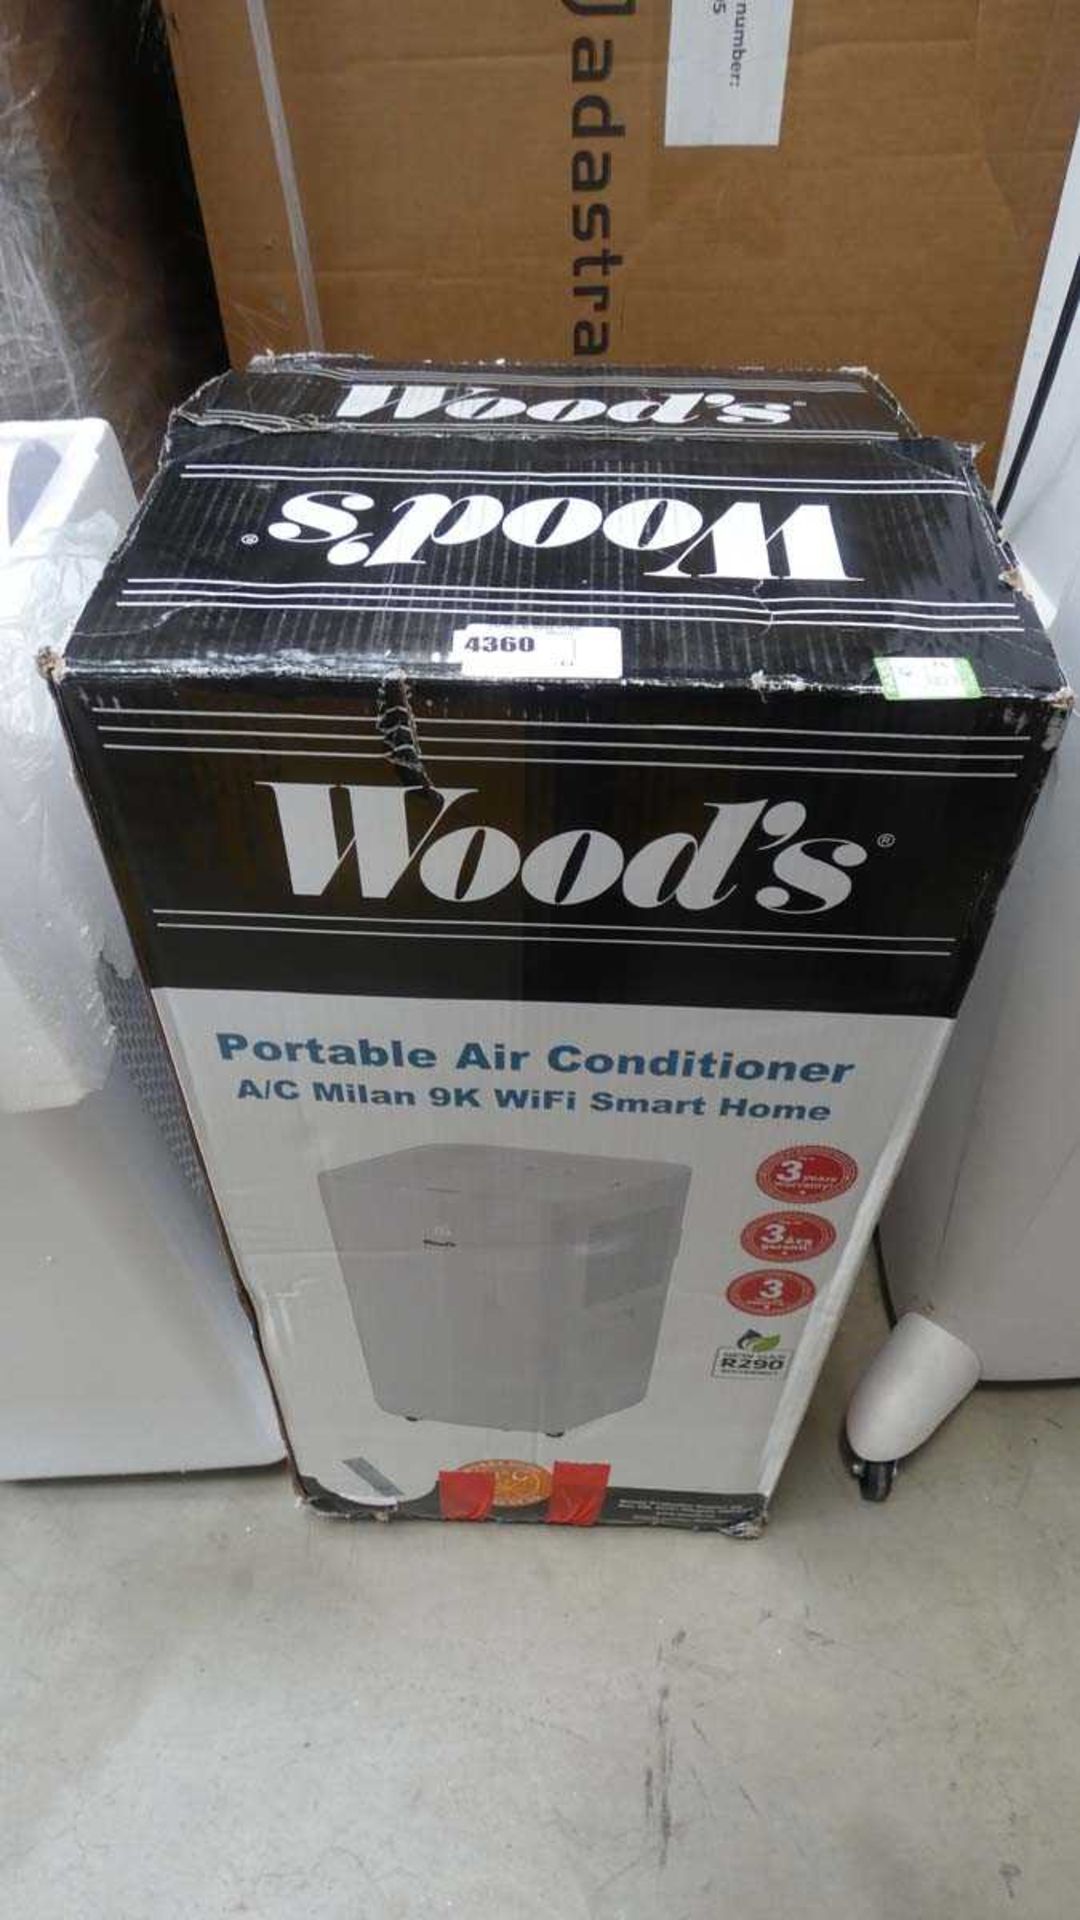 +VAT Boxed Woods portable air conditioner